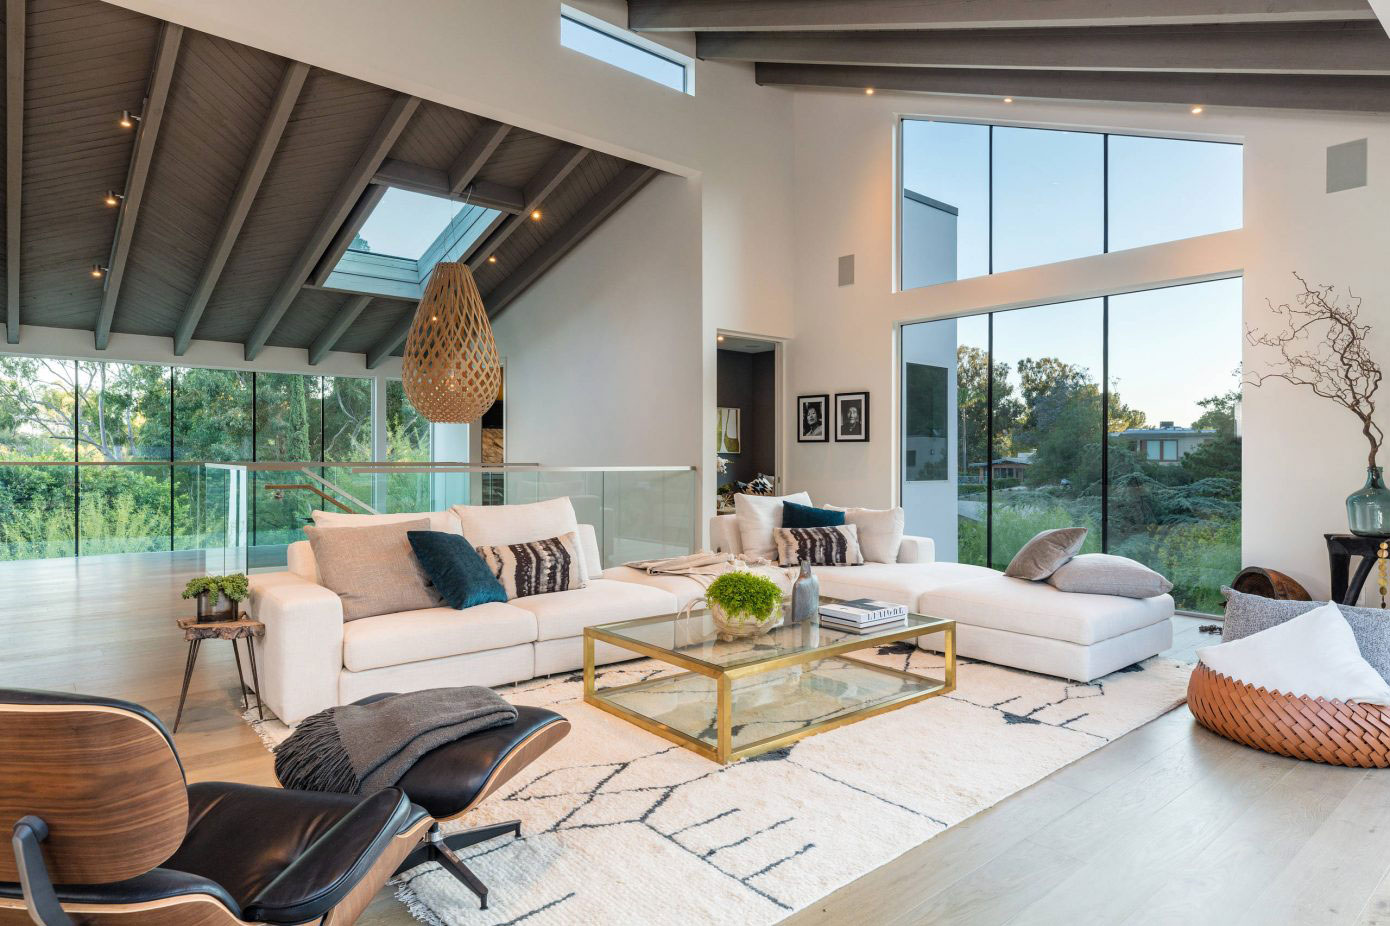 Living room with high ceilings